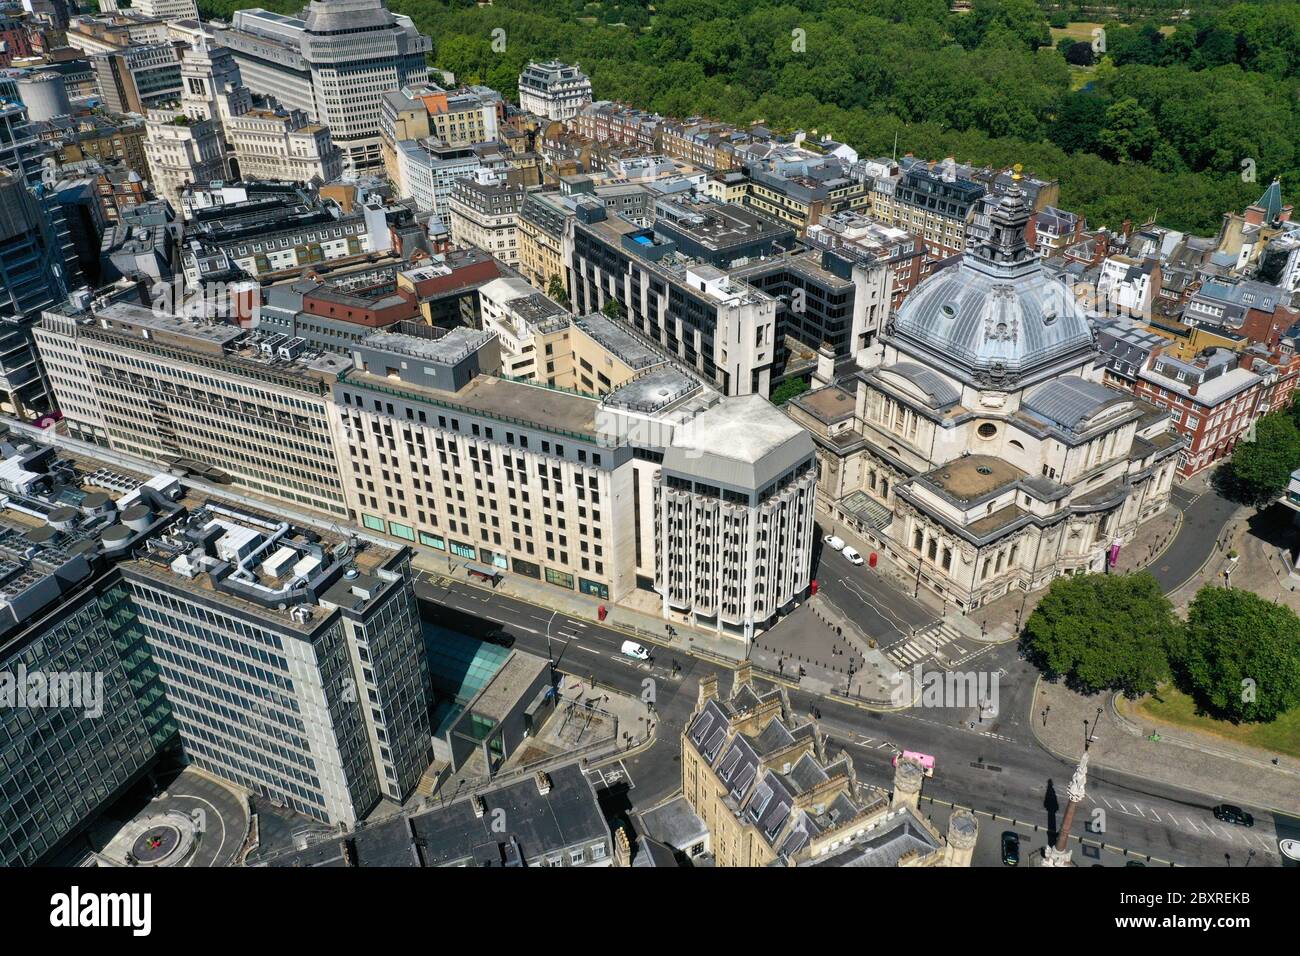 An aerial view of London, at the junction of Victoria Street and Tothill Street, showing Westminster Abbey (bottom left), the Crimea and Indian Mutiny memorial, the department for Education (top left), Barclays Bank (centre) and Methodist Central Hall on Storey's Gate (right). Stock Photo